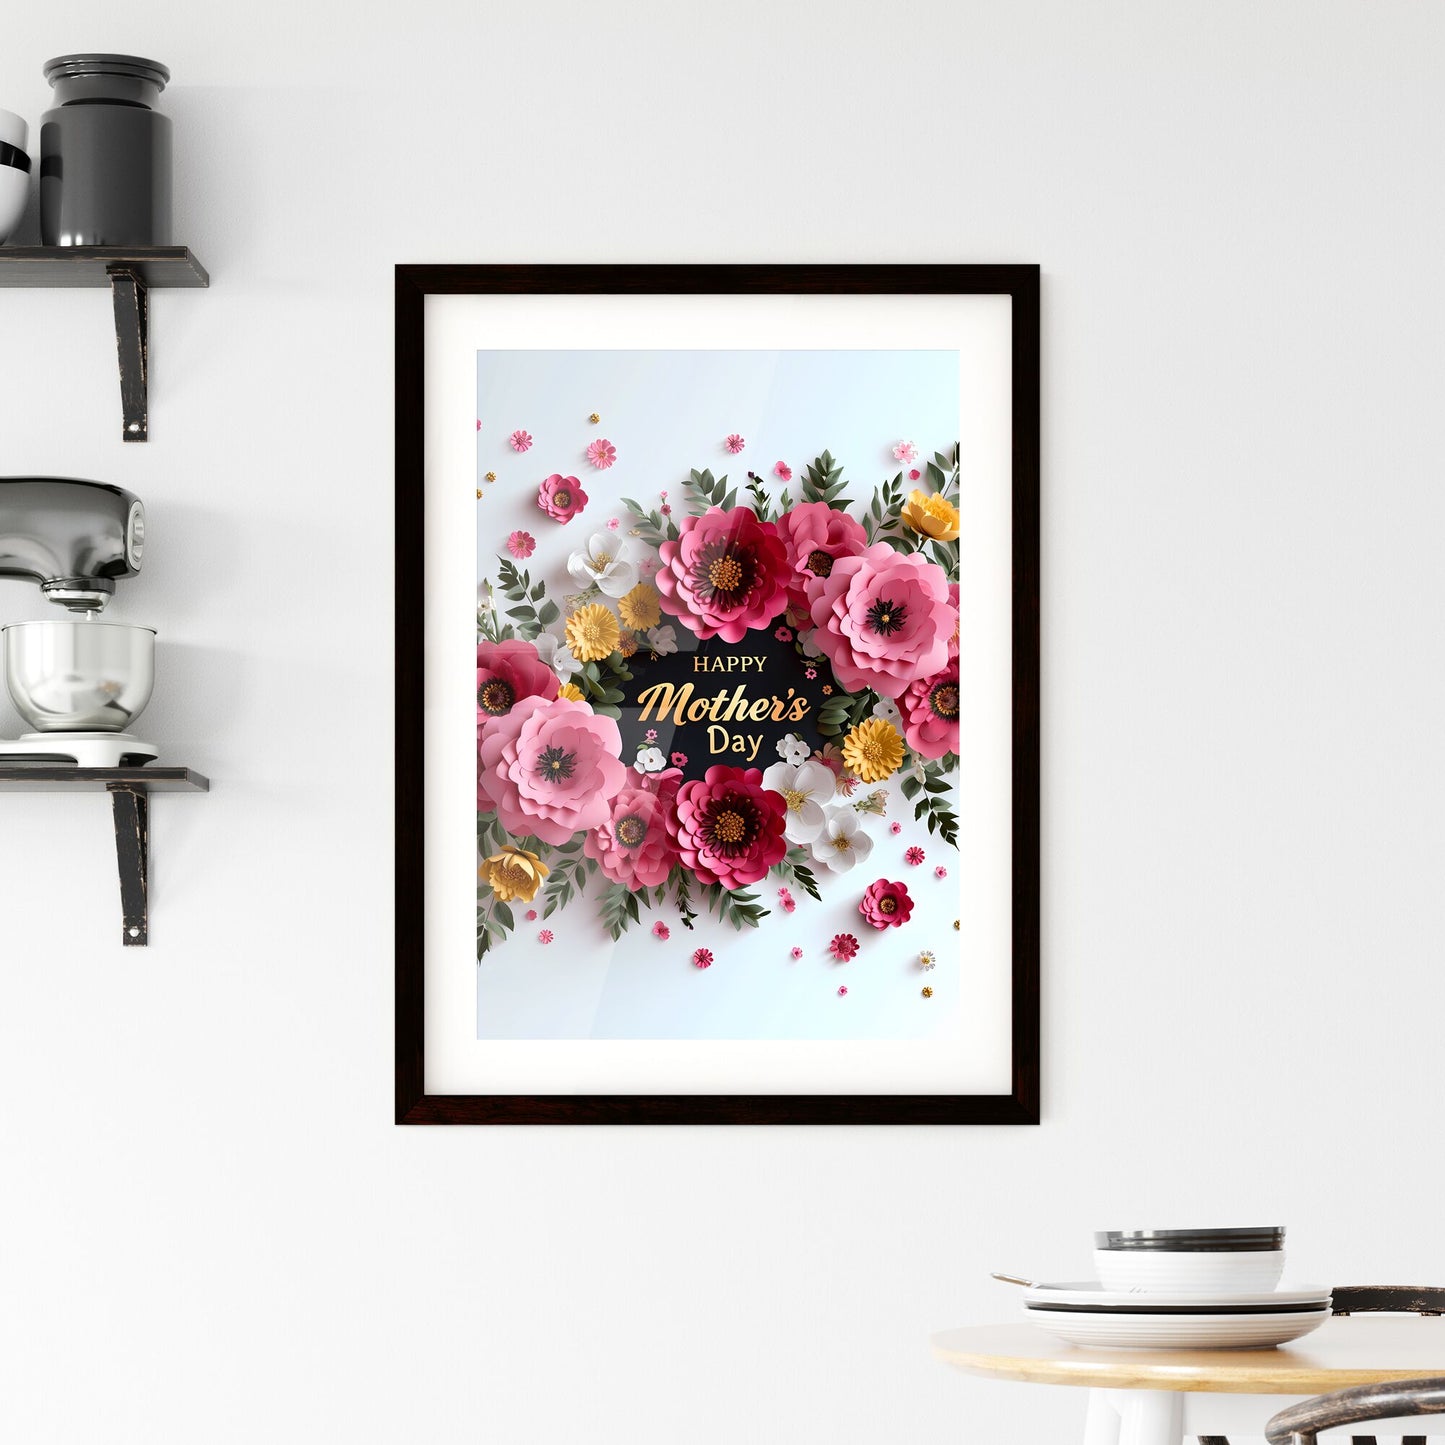 A Poster of happy mother's day - A Group Of Flowers And Leaves Default Title